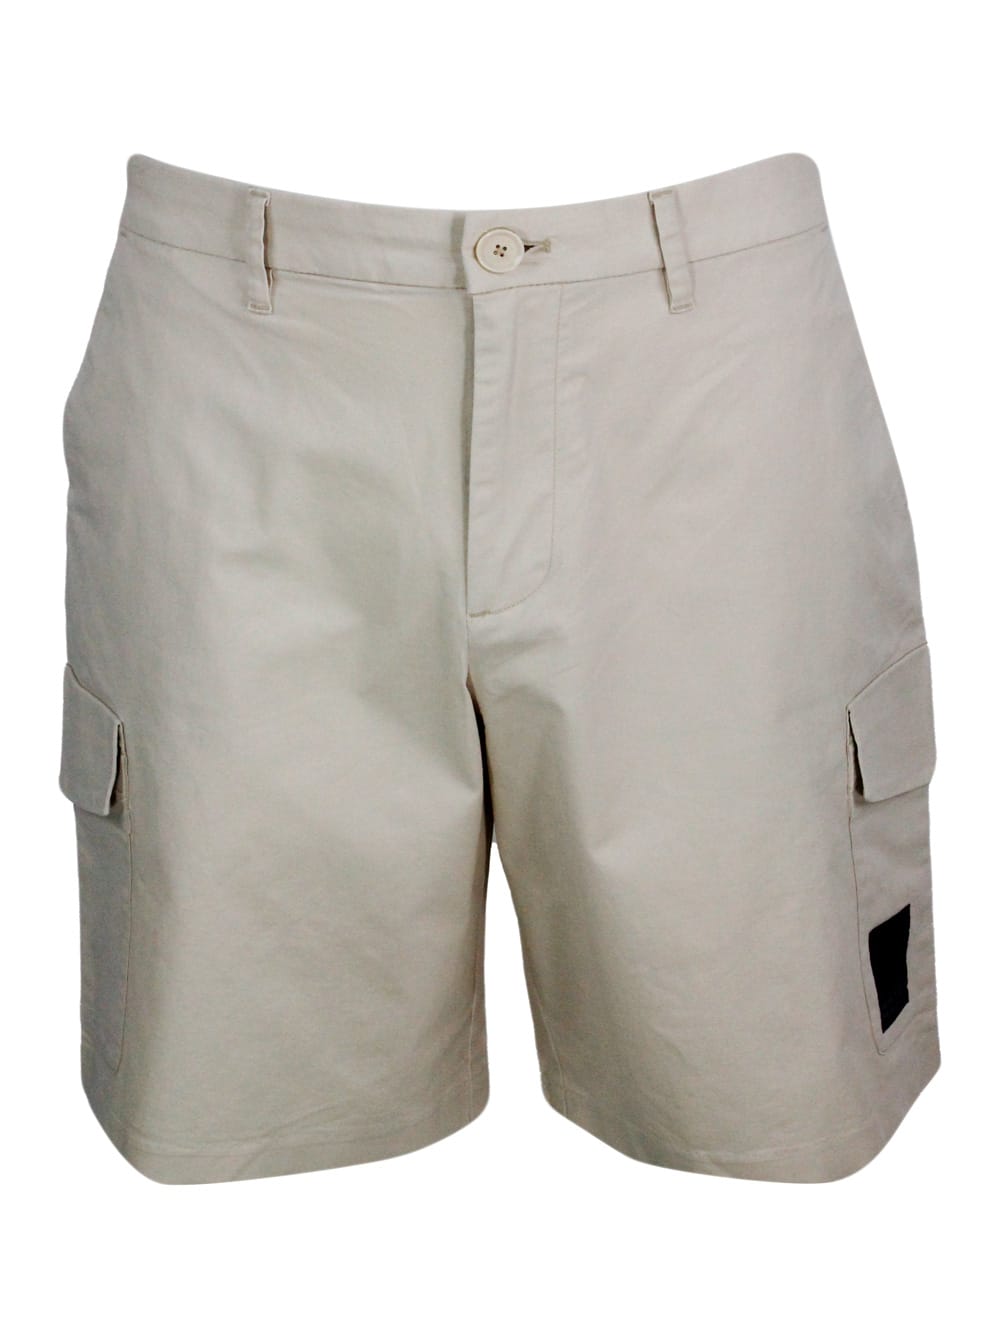 Armani Collezioni Stretch Cotton Bermuda Shorts, Cargo Model With Large Pockets On The Leg And Zip And Button Closure In Beige